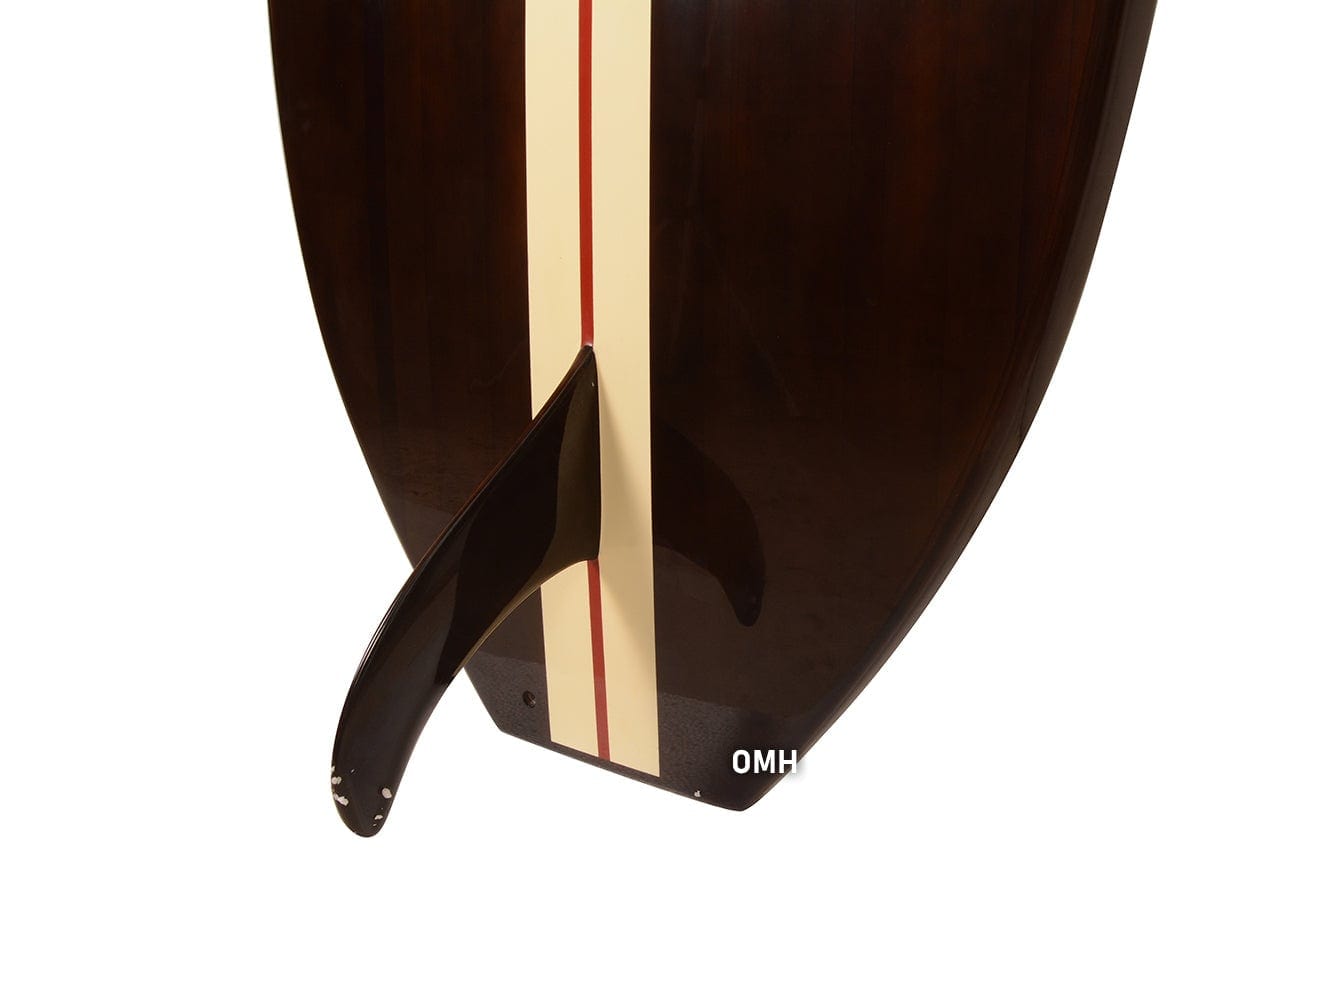 ALDO Hobbies & Creative Arts> Collectibles> Scale Model Real Fully Functional Black Paddle Board in Classic  Cedarwood 11ft with 1 fin